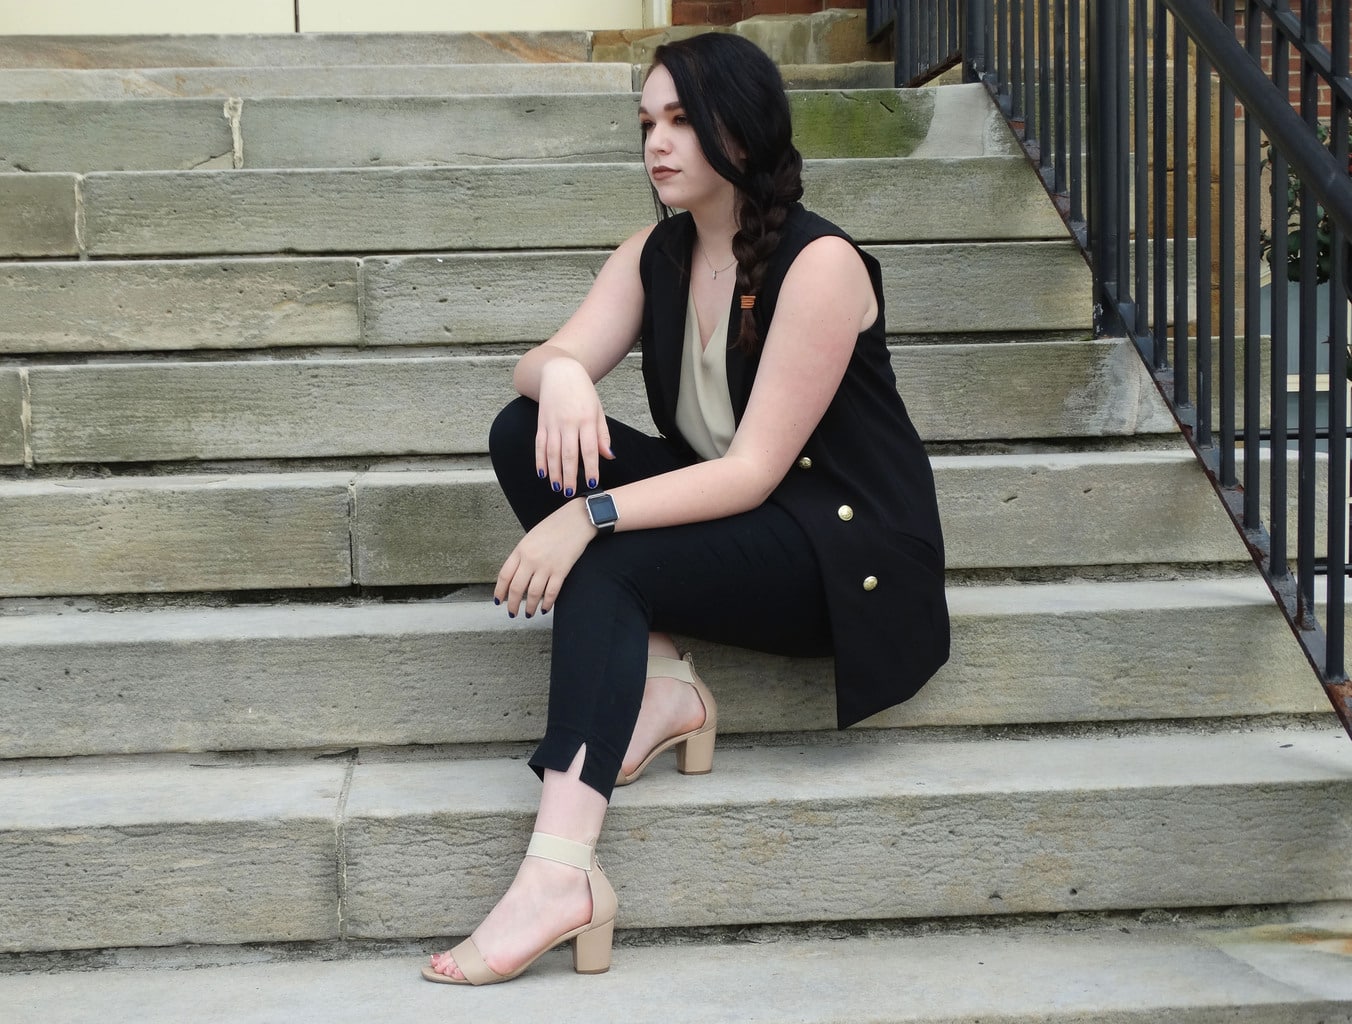 Bree wears a black military-inspired vest with gold buttons, a tan v-neck tank top, and black capri trousers with tan chunky-heeled sandals.